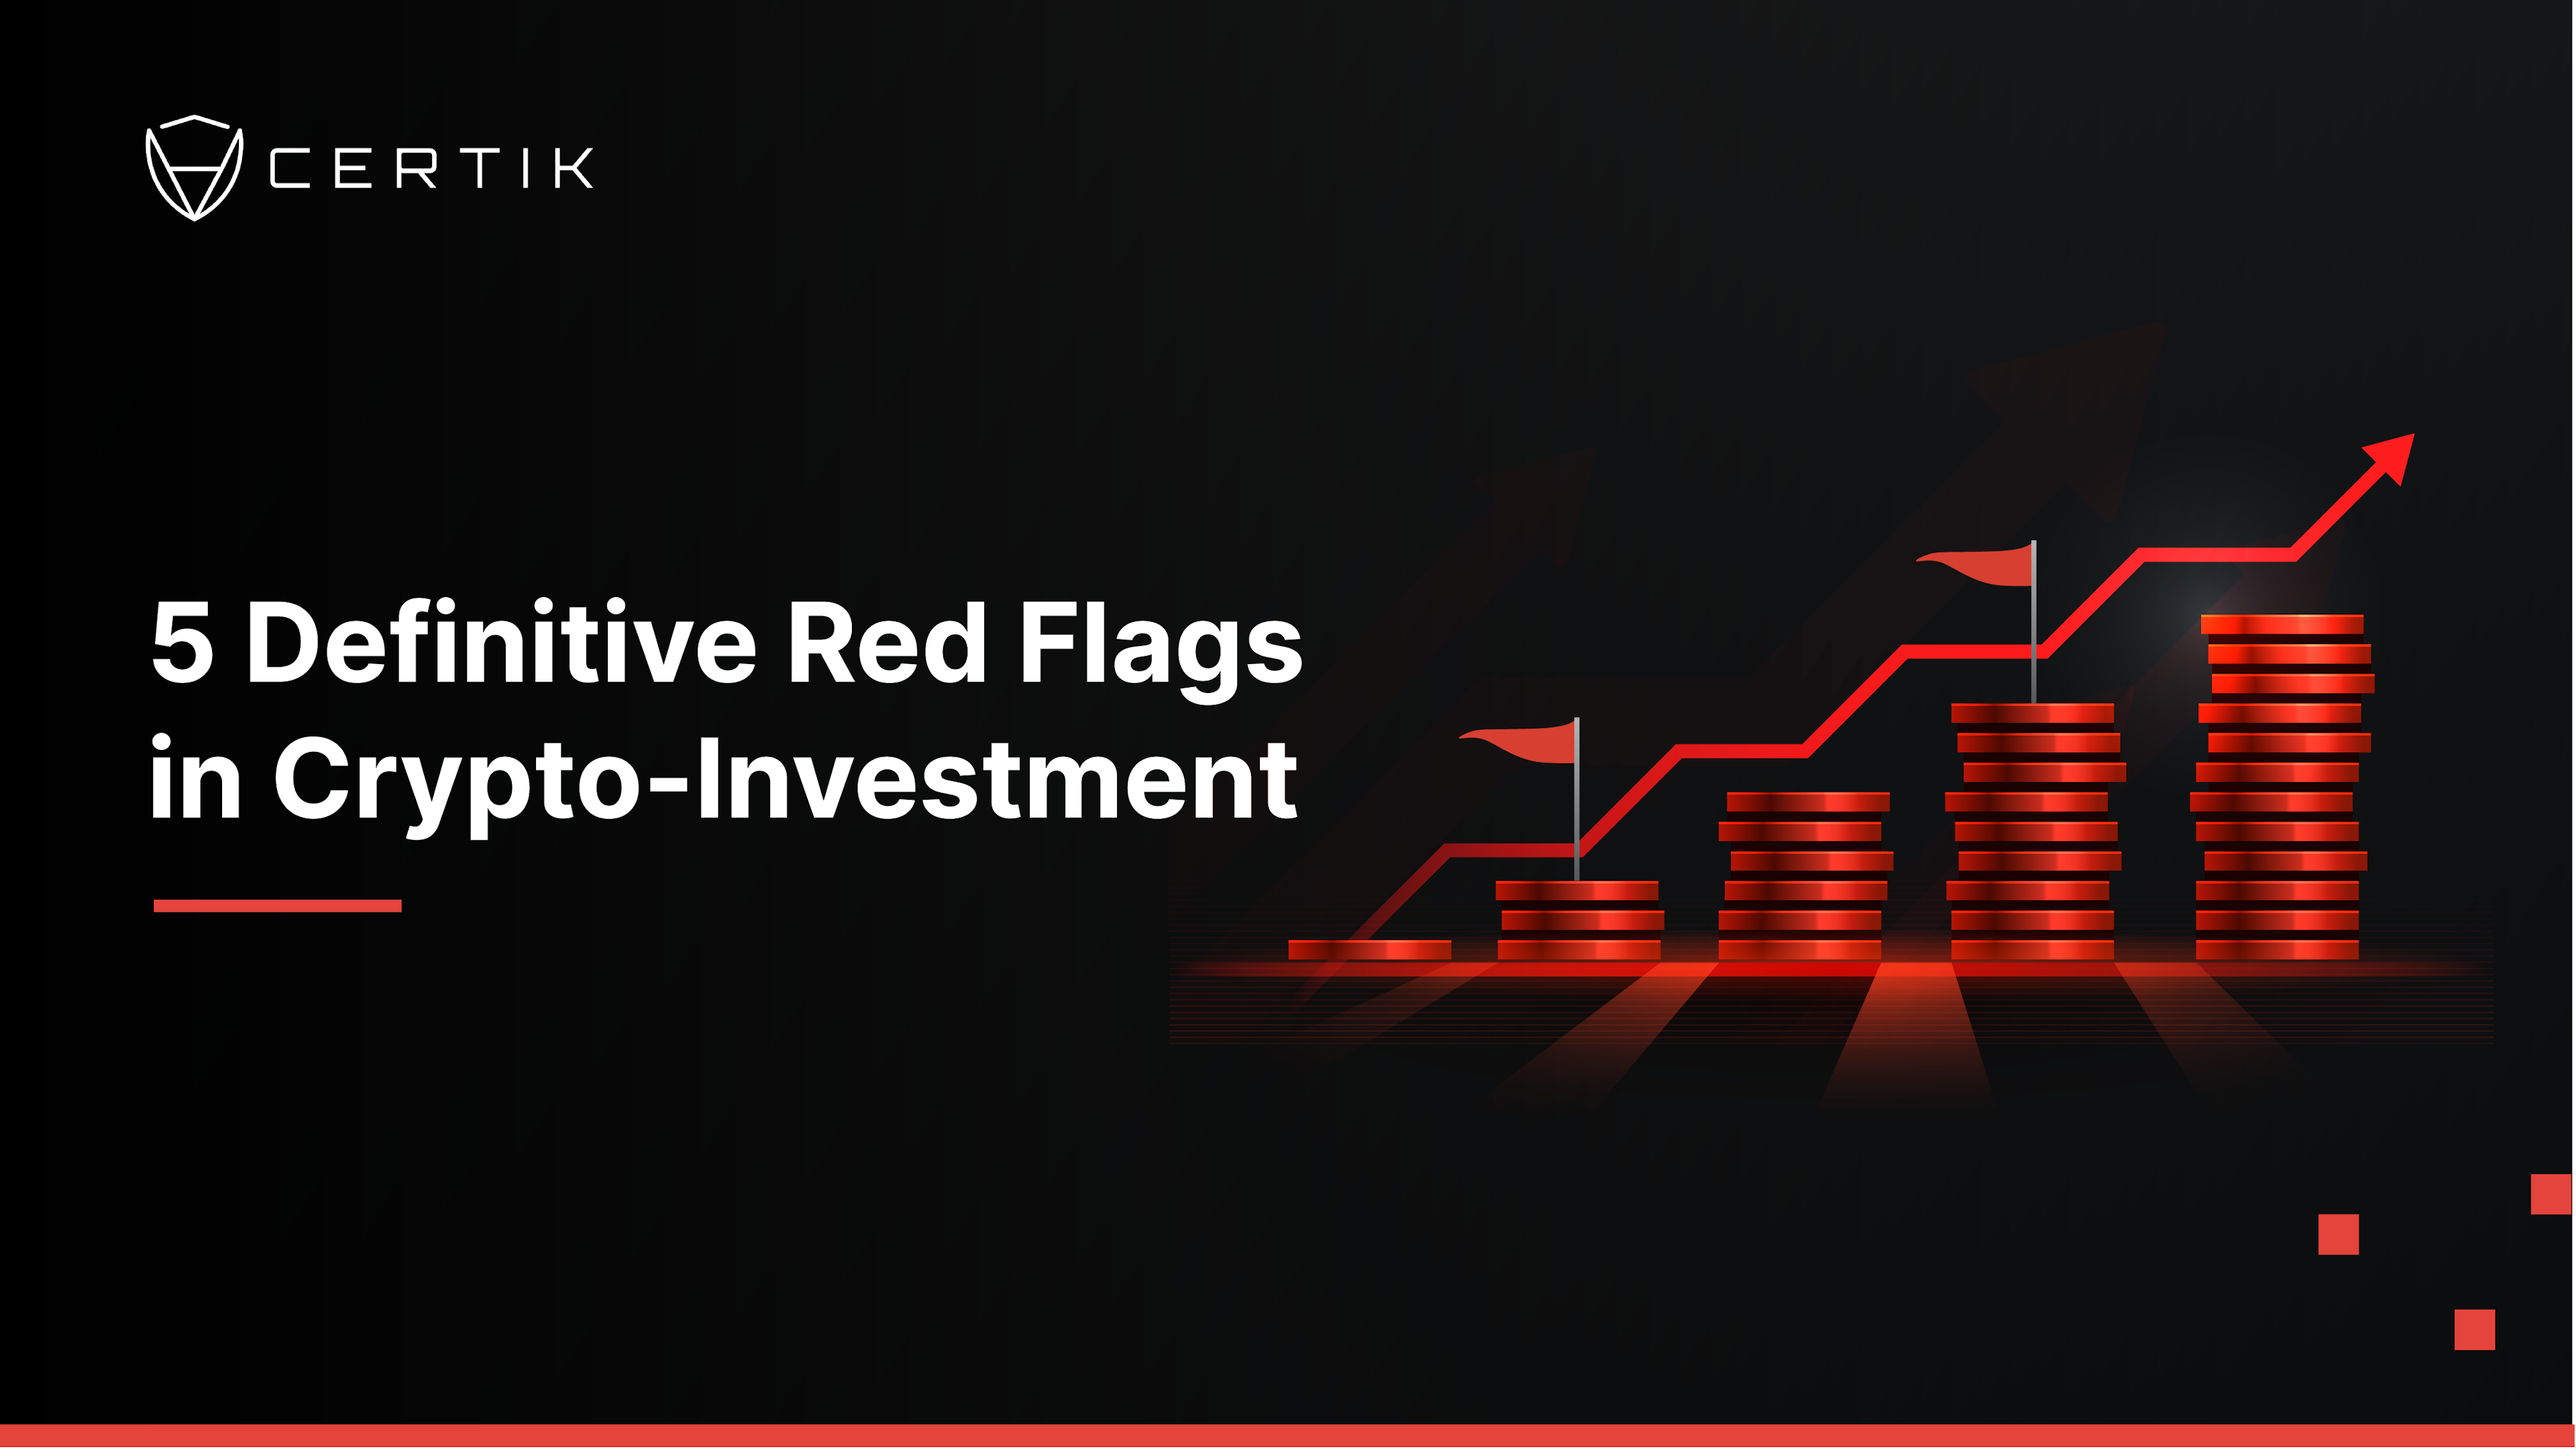 5 Definitive Red Flags in Crypto-Investment